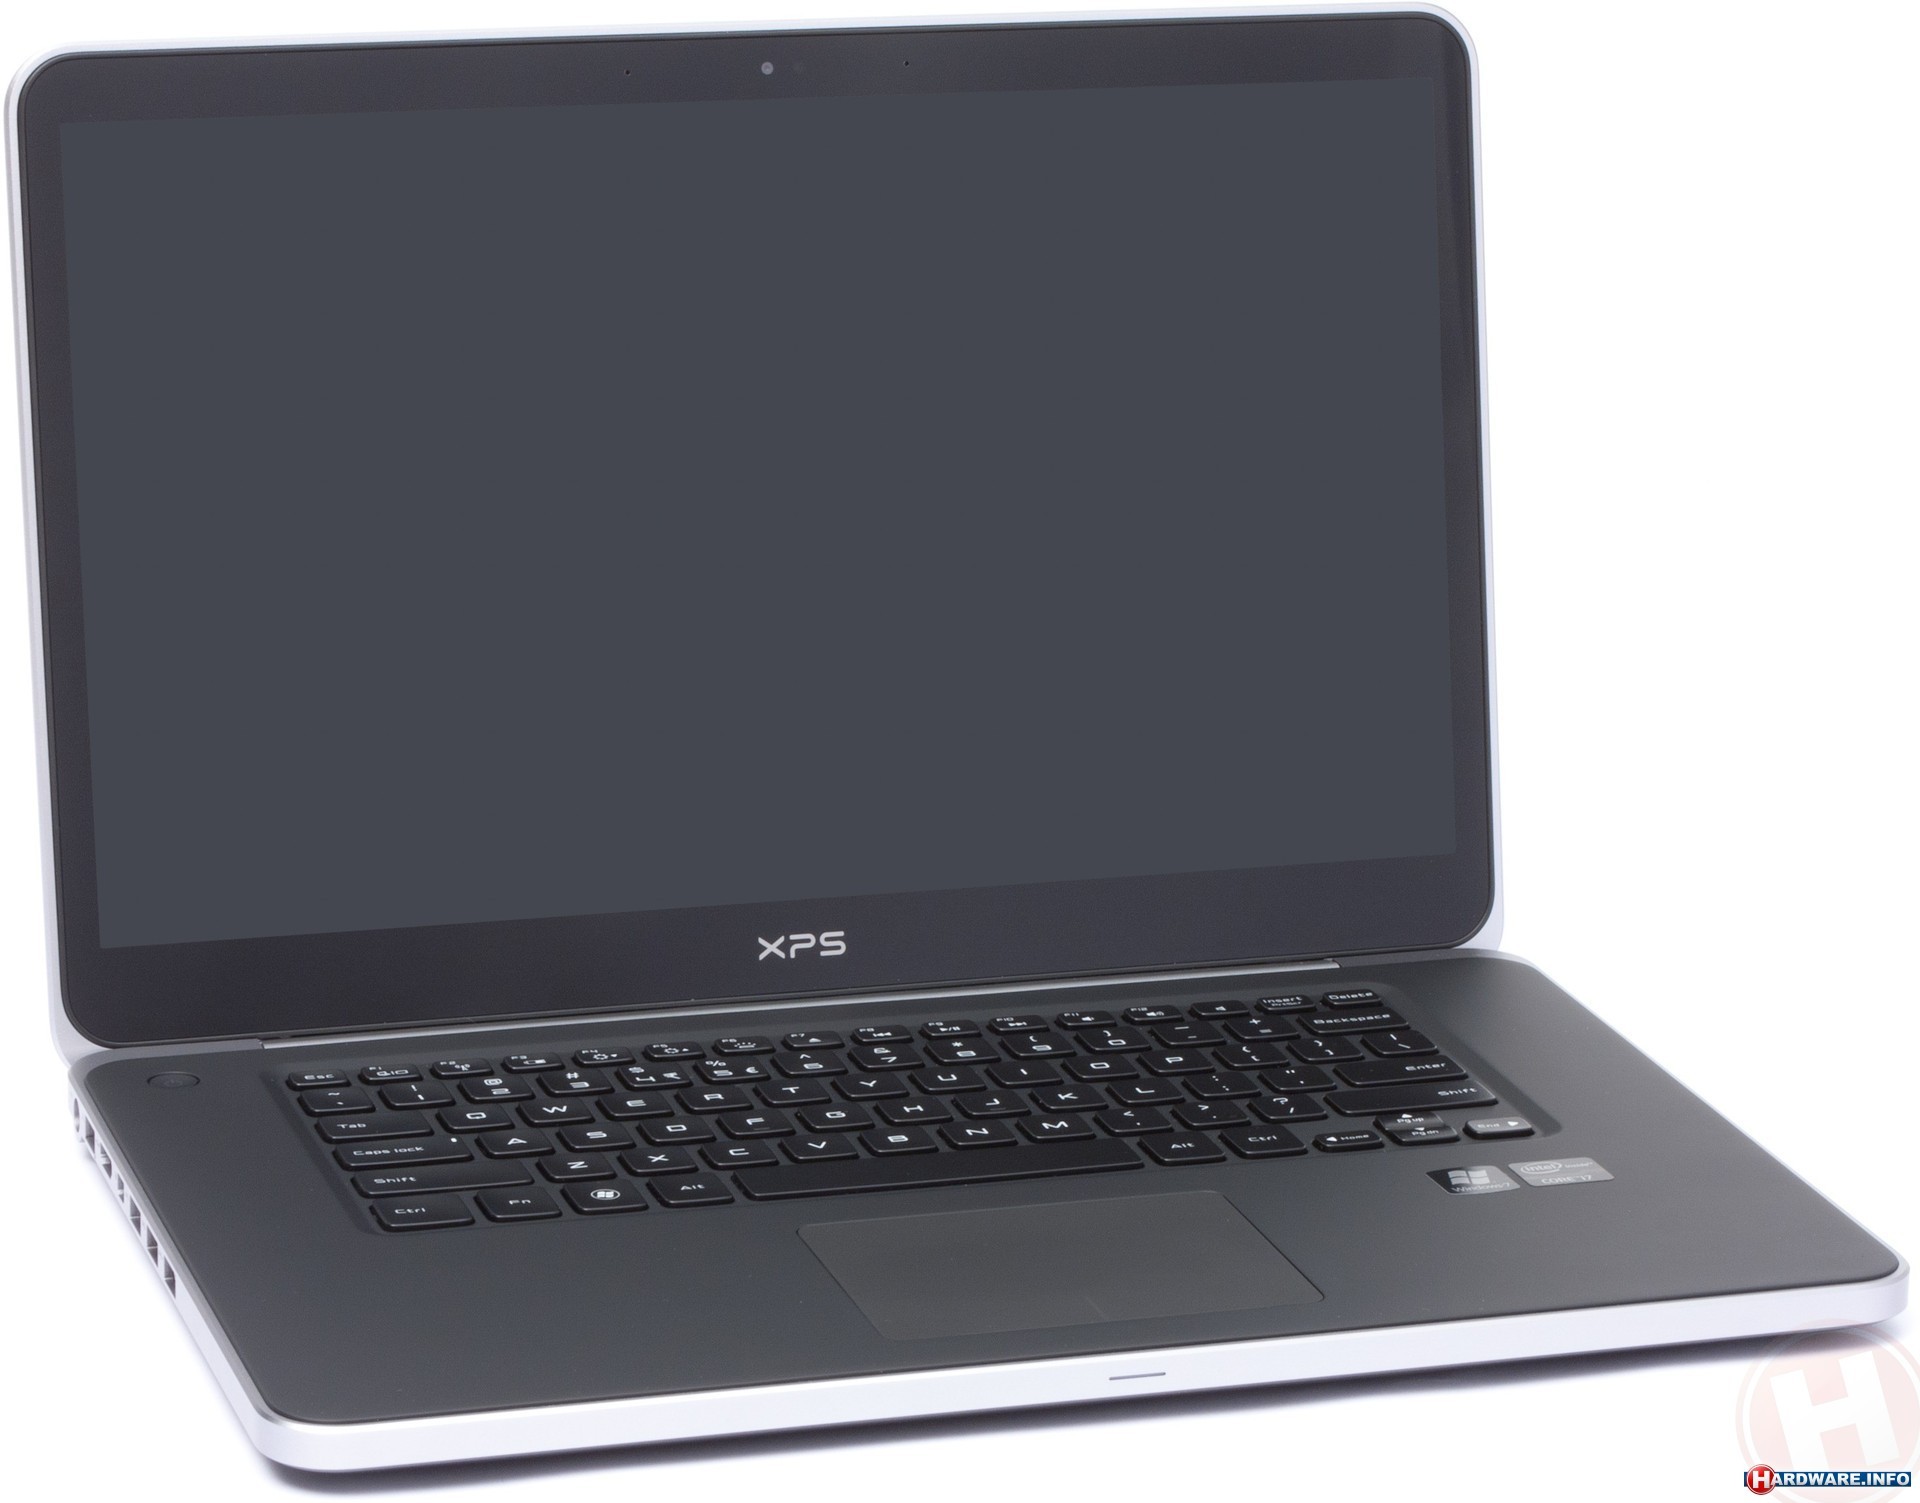 Dell Xps Re HD Photos Gallery